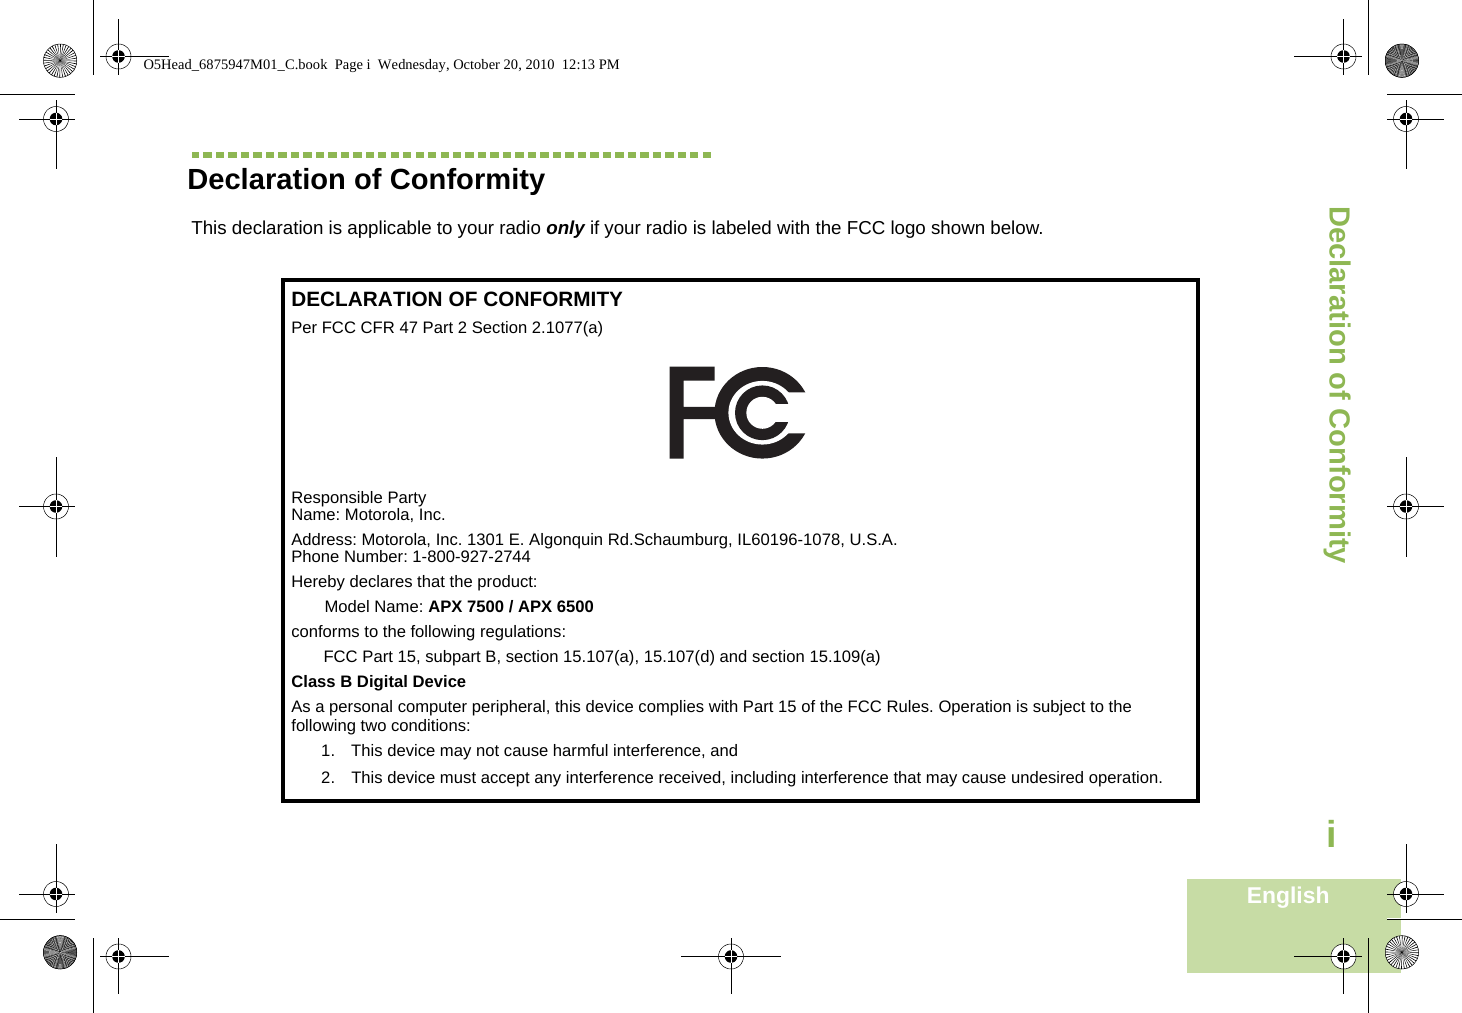 Declaration of ConformityEnglishiDeclaration of ConformityThis declaration is applicable to your radio only if your radio is labeled with the FCC logo shown below.DECLARATION OF CONFORMITYPer FCC CFR 47 Part 2 Section 2.1077(a)Responsible Party Name: Motorola, Inc.Address: Motorola, Inc. 1301 E. Algonquin Rd.Schaumburg, IL60196-1078, U.S.A.Phone Number: 1-800-927-2744Hereby declares that the product:Model Name: APX 7500 / APX 6500conforms to the following regulations:FCC Part 15, subpart B, section 15.107(a), 15.107(d) and section 15.109(a)Class B Digital DeviceAs a personal computer peripheral, this device complies with Part 15 of the FCC Rules. Operation is subject to the following two conditions:1. This device may not cause harmful interference, and 2. This device must accept any interference received, including interference that may cause undesired operation.O5Head_6875947M01_C.book  Page i  Wednesday, October 20, 2010  12:13 PM